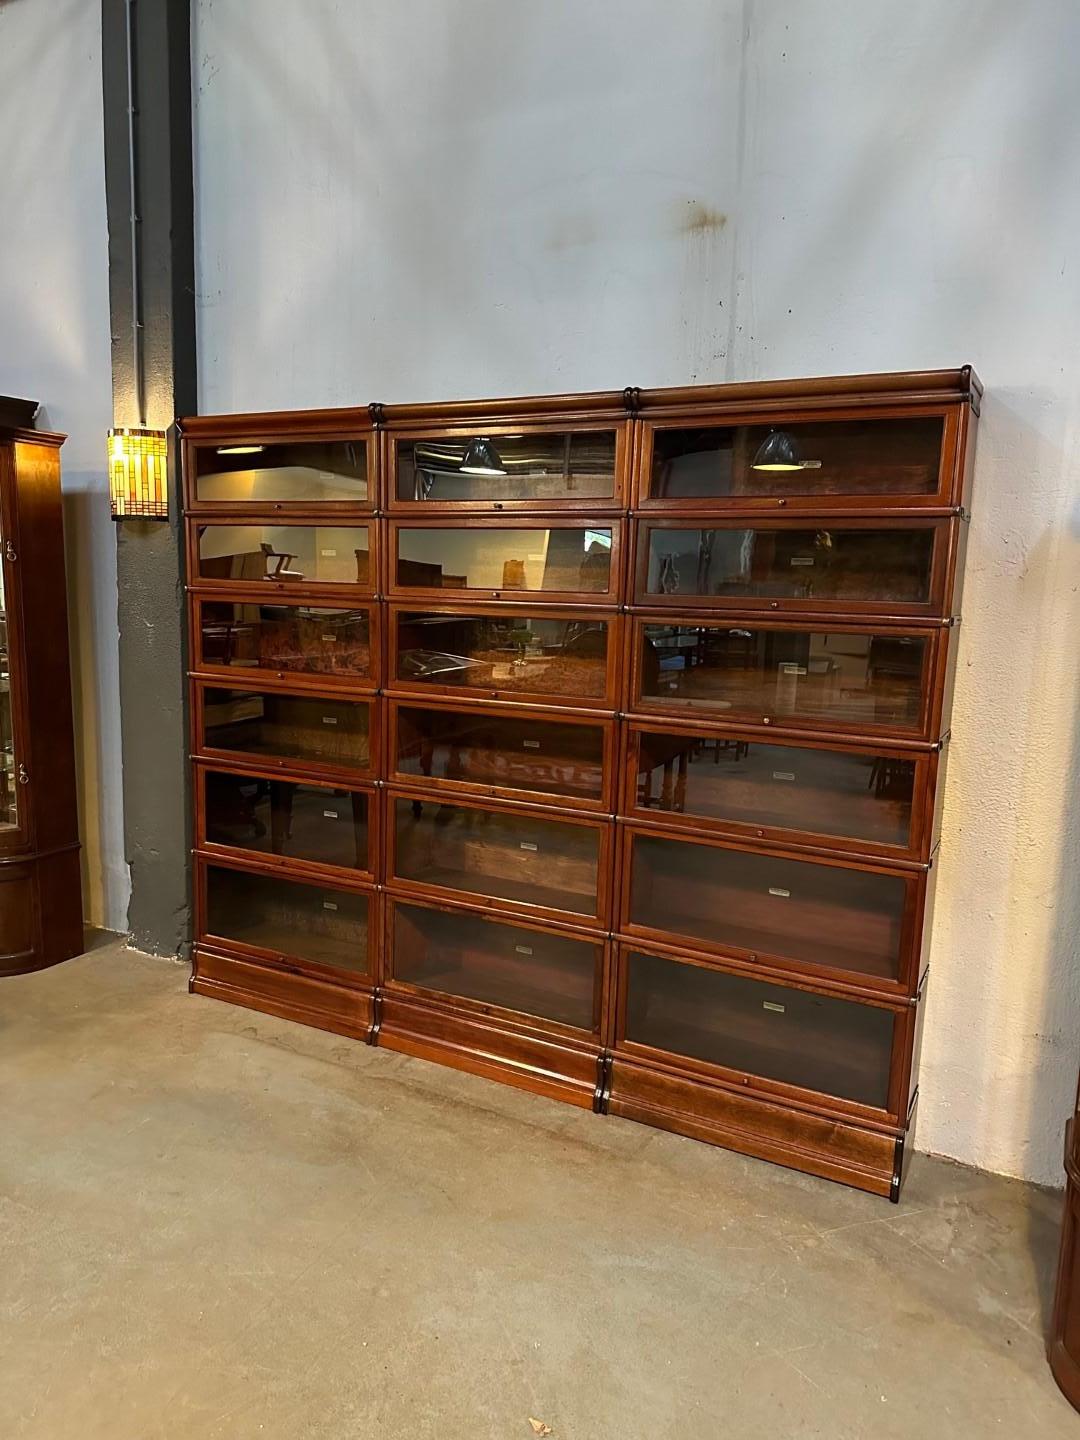 Large antique mahogany Globe Wernicke bookcase. Consisting of 18 stackable parts. Entirely in perfect condition. Nice warm color. The cabinet can always be expanded with extra parts, both in height and width.
Origin: England
Period: Approx.